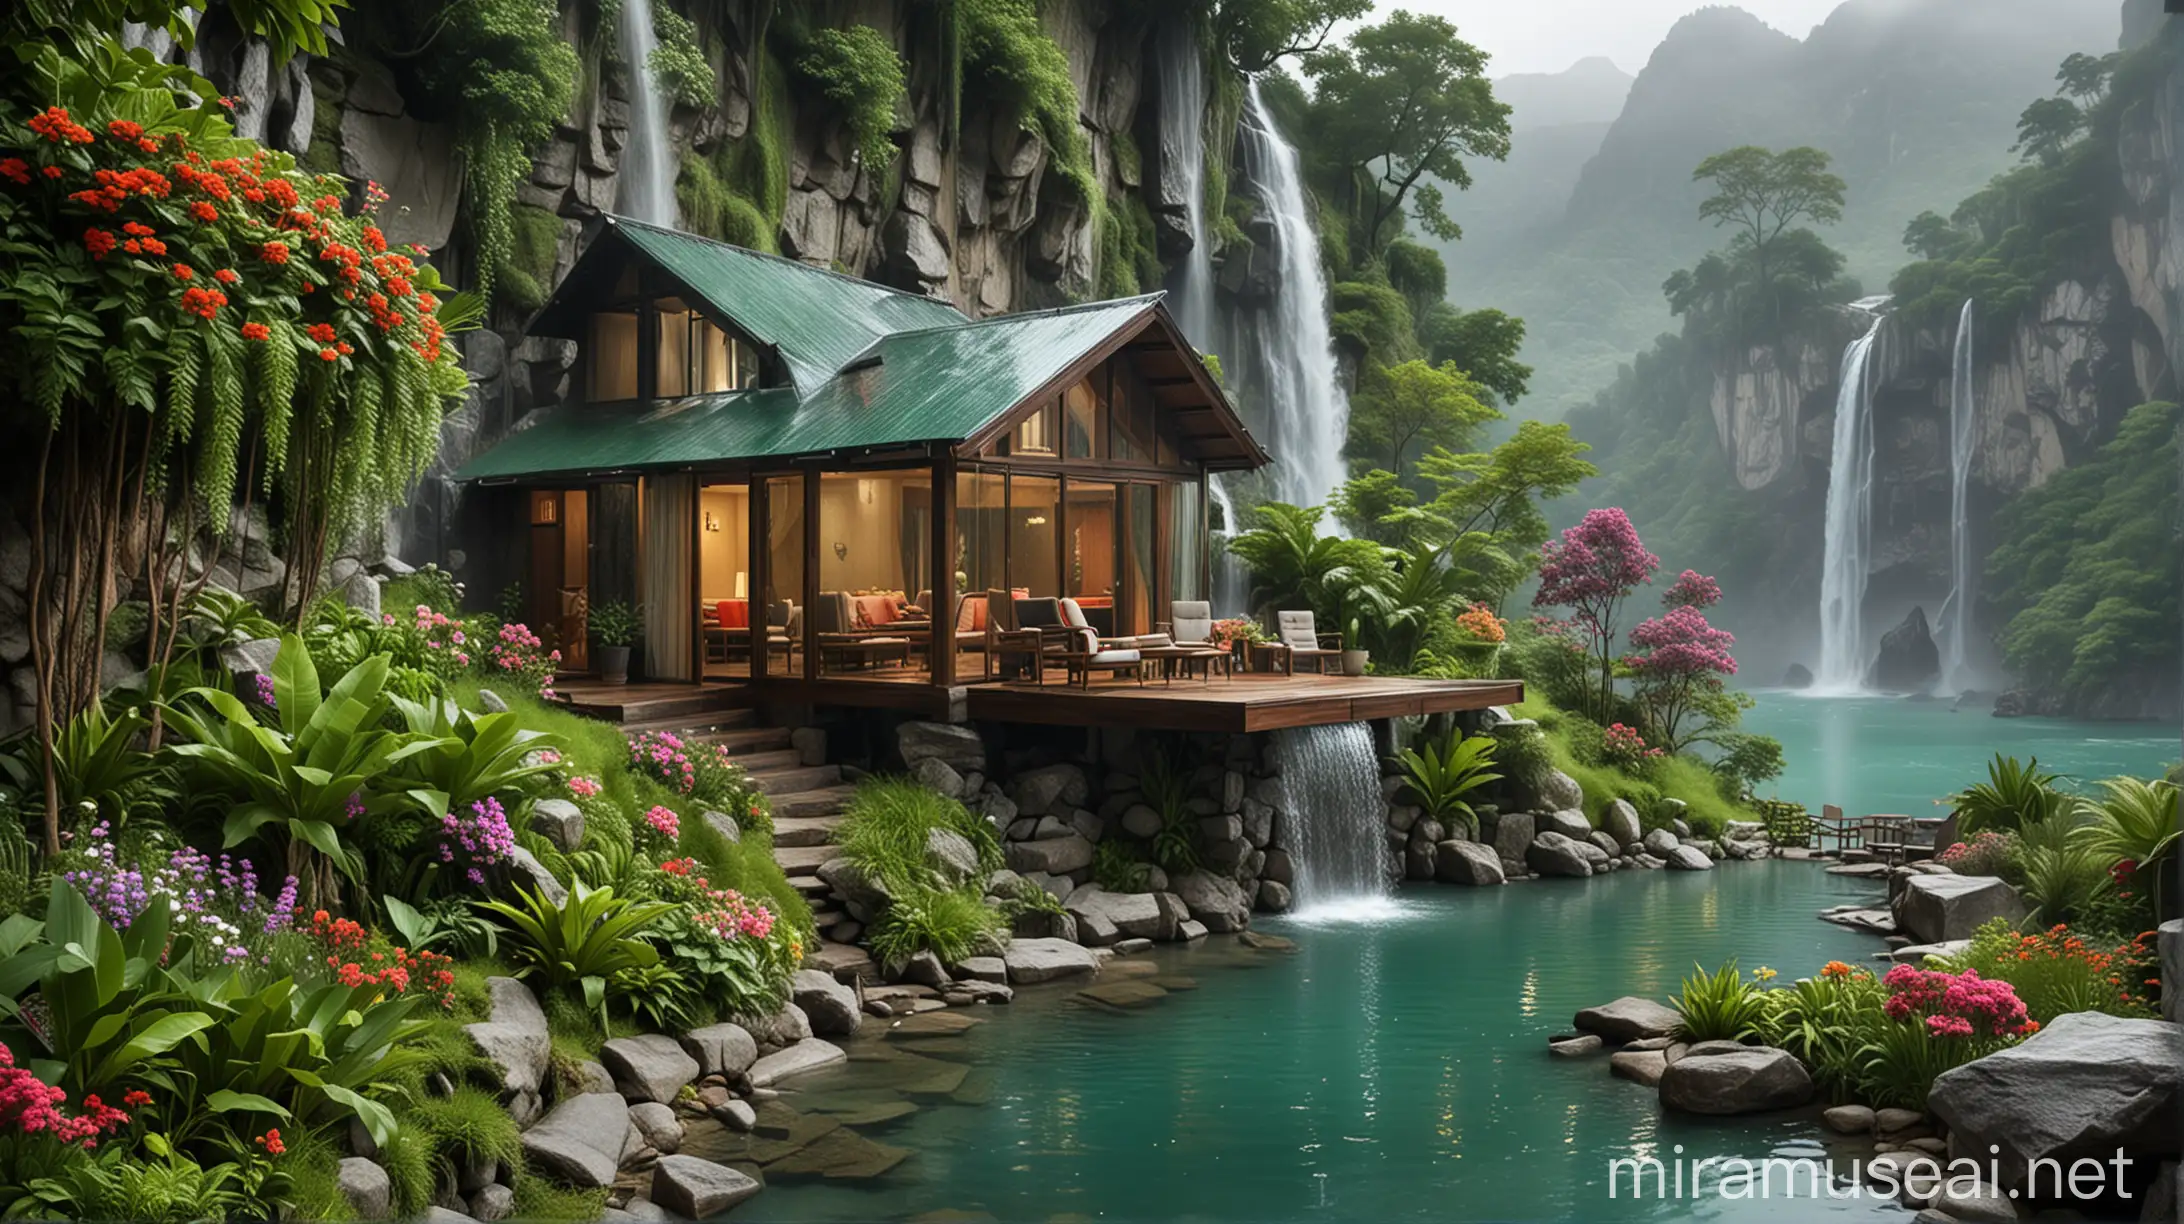 moonsoon rainy weather house at mountain with flowers and waterfall and sitting chairs a waterfall with a hut and a lake, in the style of 32k uhd, moonsoon emerald and green, colorful dreams, romantic riverscapes, beautiful scenery waterfall view, a lake, in the style of 32k uhd, green, colorful dreams, romantic riverscapes, swiss style, mist, highly polished surfaces Fantastic glass home with background waterfall in the mountain Modern home office seamlessly integrated into a lush jungle, cascading waterfall in the background rainy weather